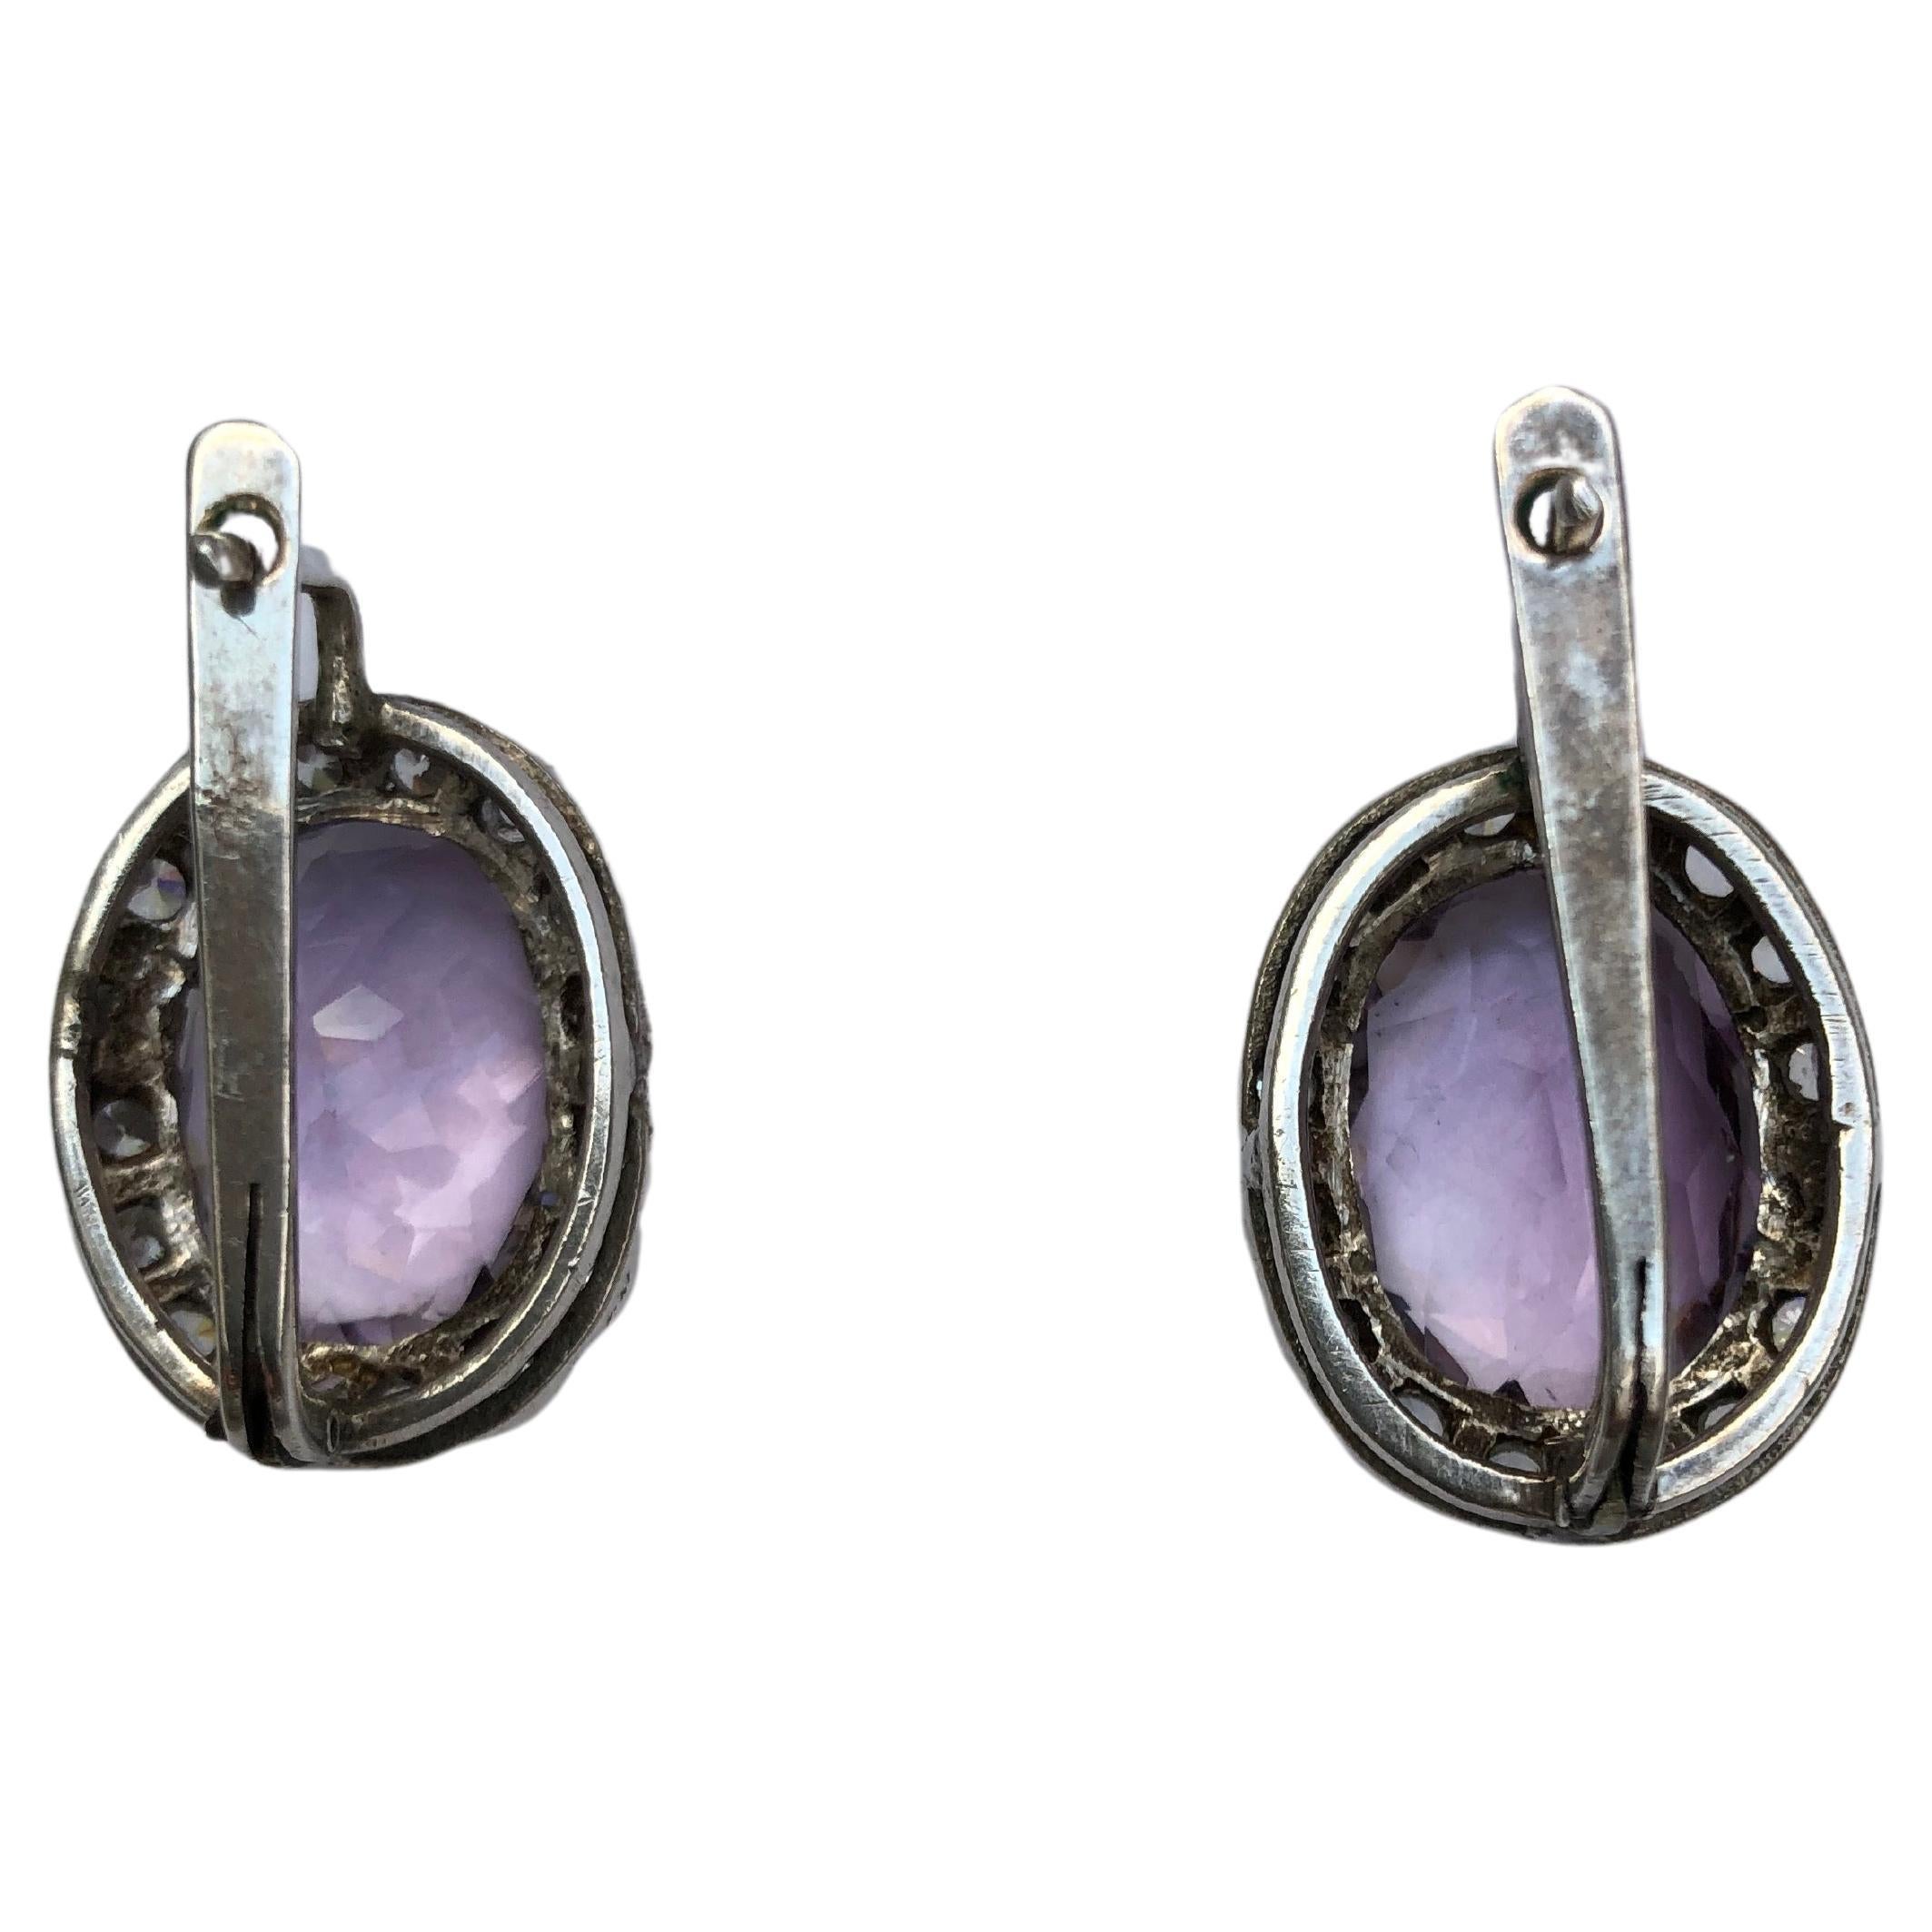  Pair of vintage European stunning amethyst drop earrings. Beautiful large oval amethyst surrounded with  sparkling cubic zirconia,  mounted in sterling silver marked 925, about 0.98 inch by 0.78 inch, weight about 13 grams.